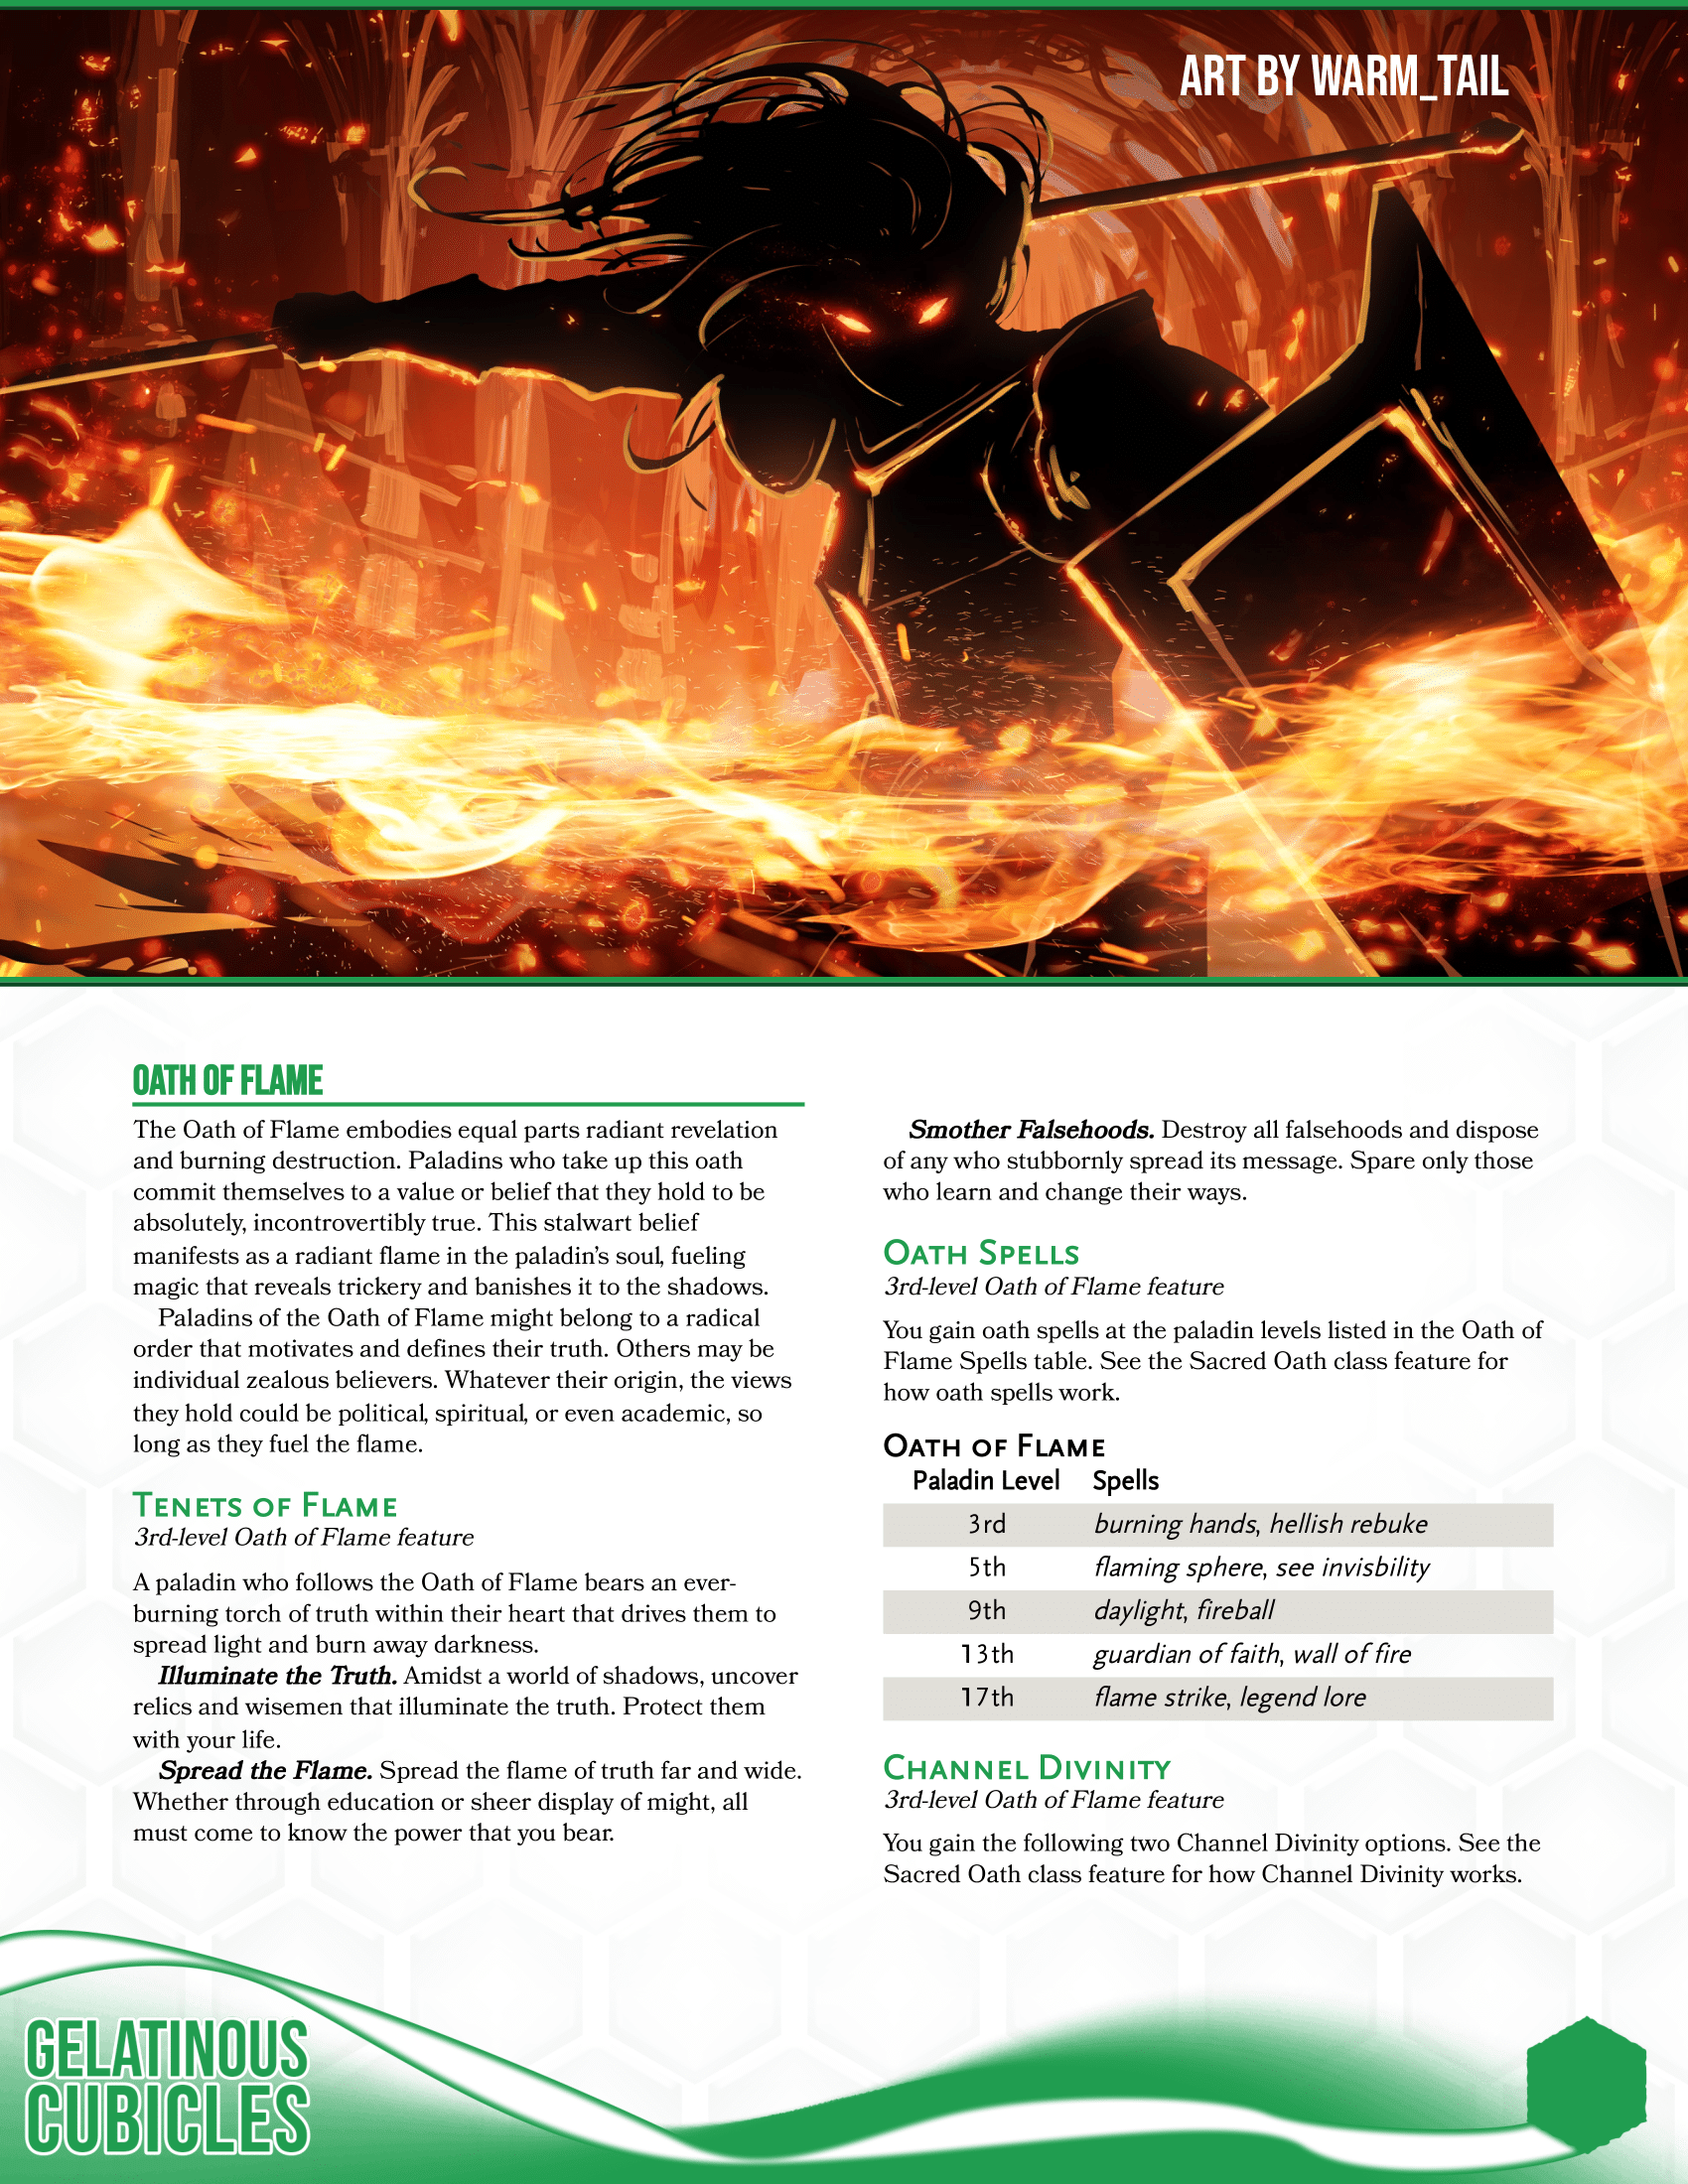 Oath of Flame (Gelatinous Cubicles)-1.png